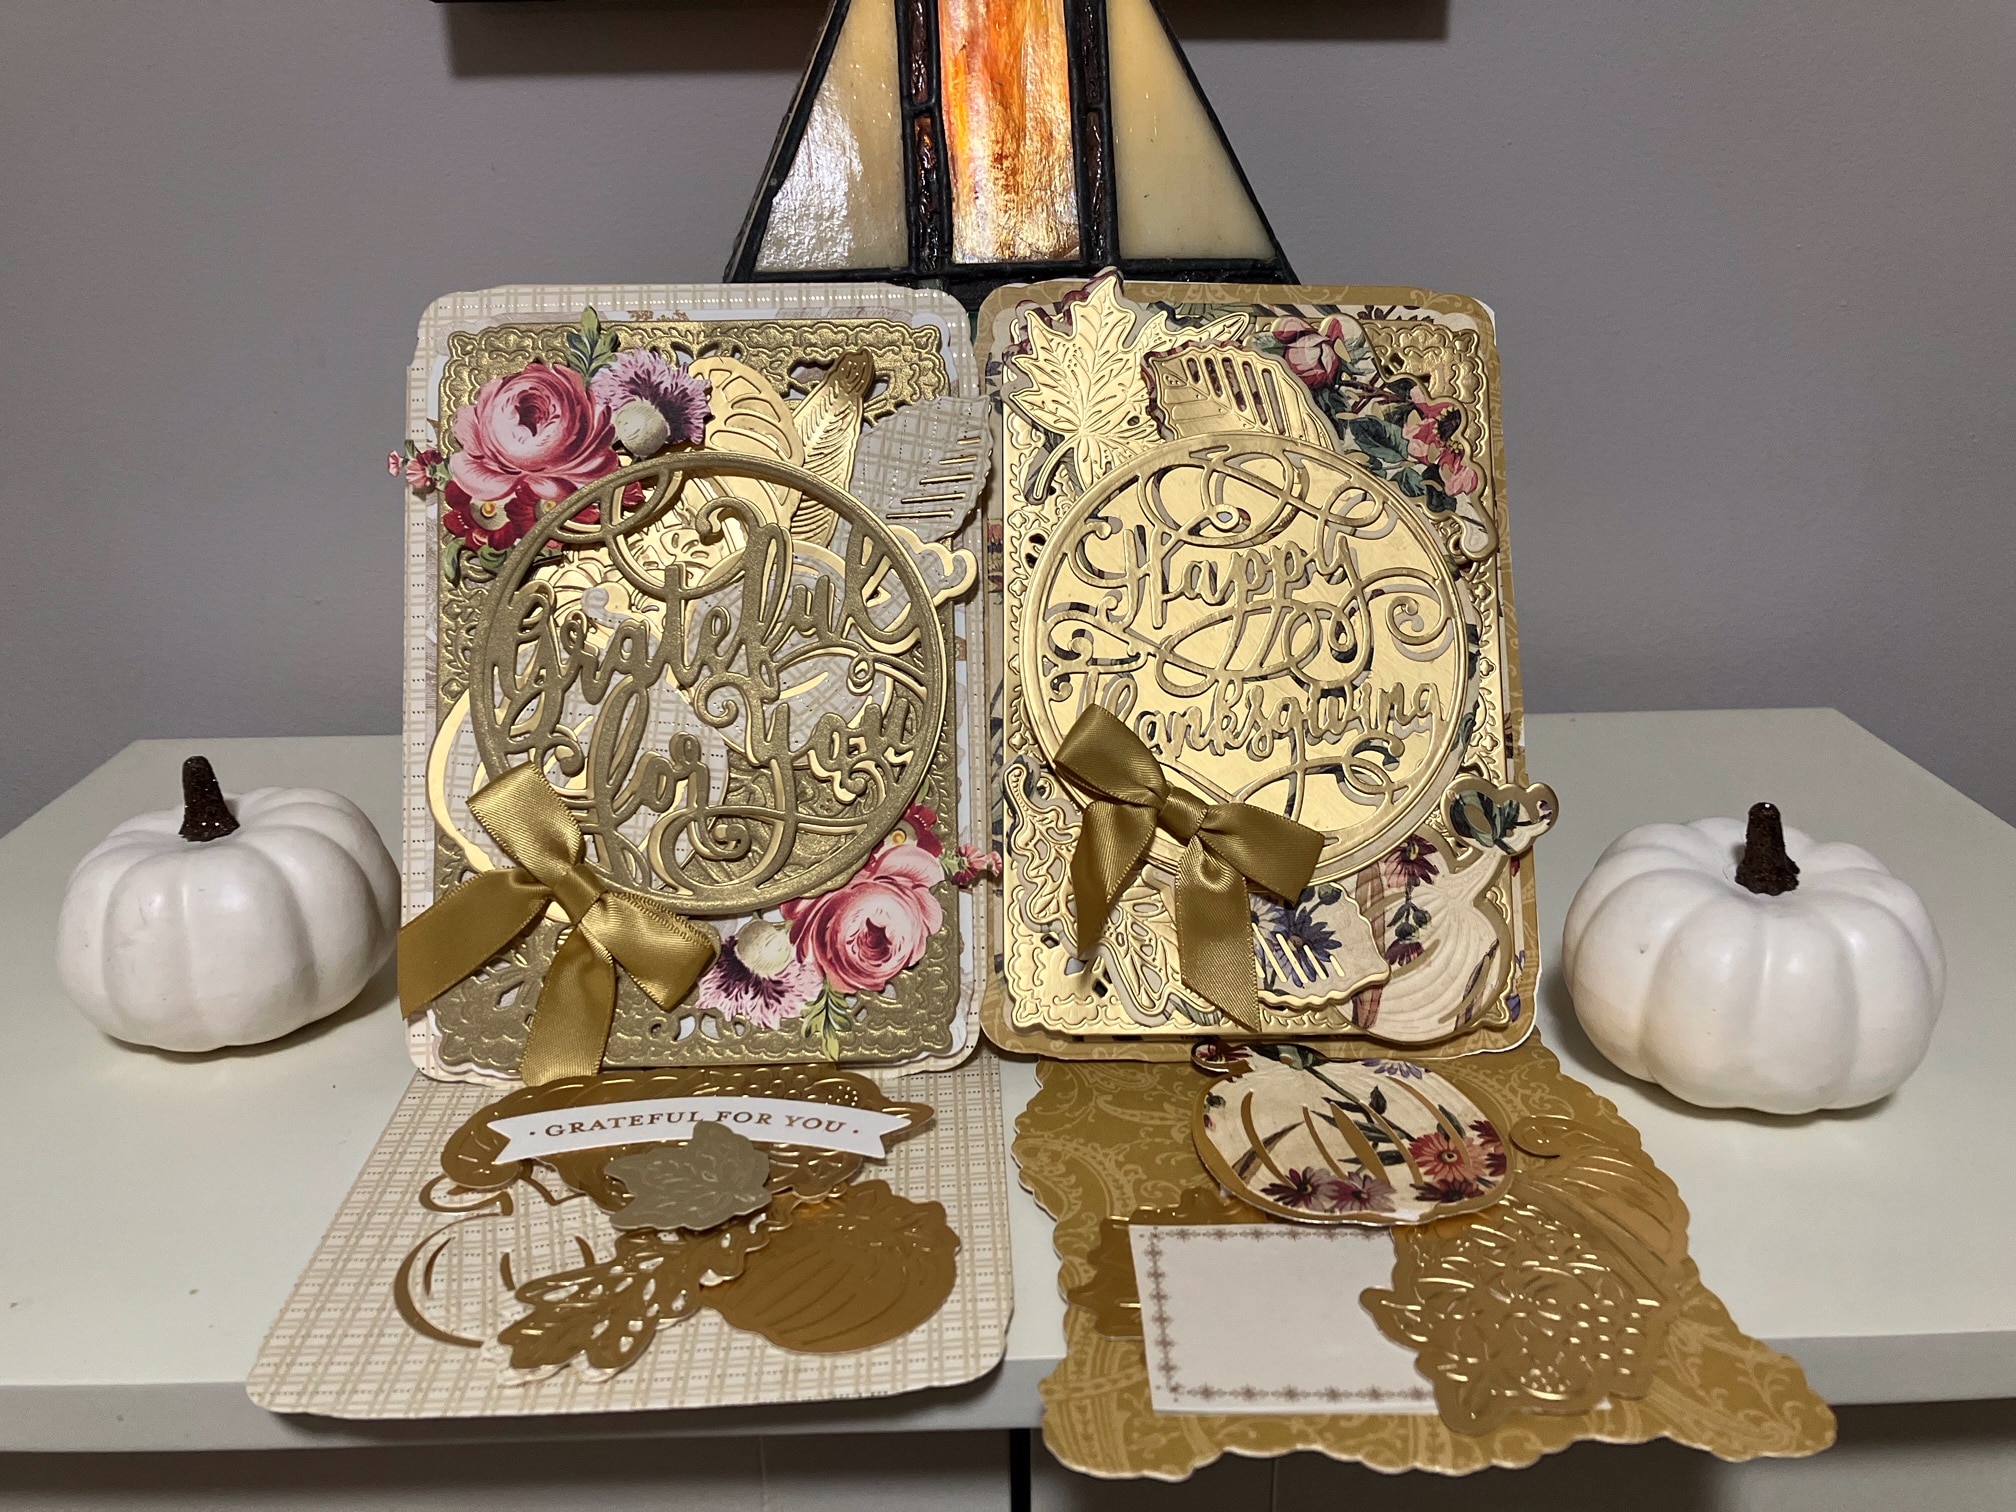 Two cards with gold foil and pumpkins on a table.